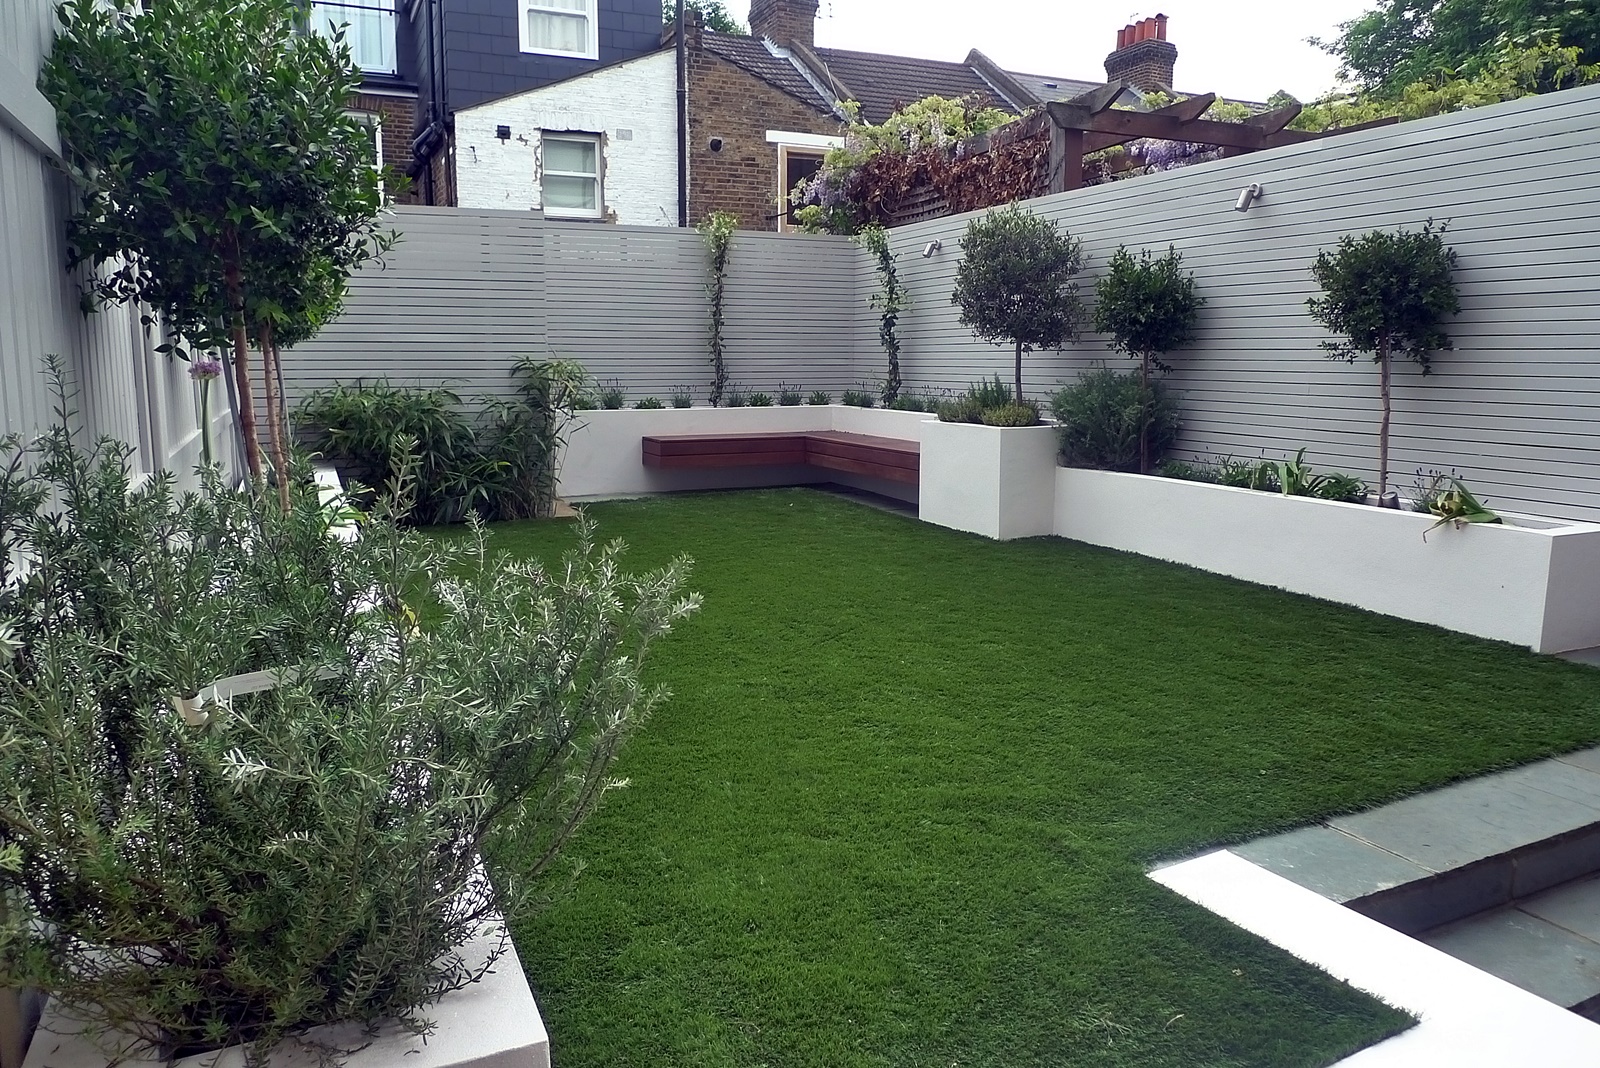 How To Create Backyard Privacy For Your, How To Landscape A Small Backyard For Privacy